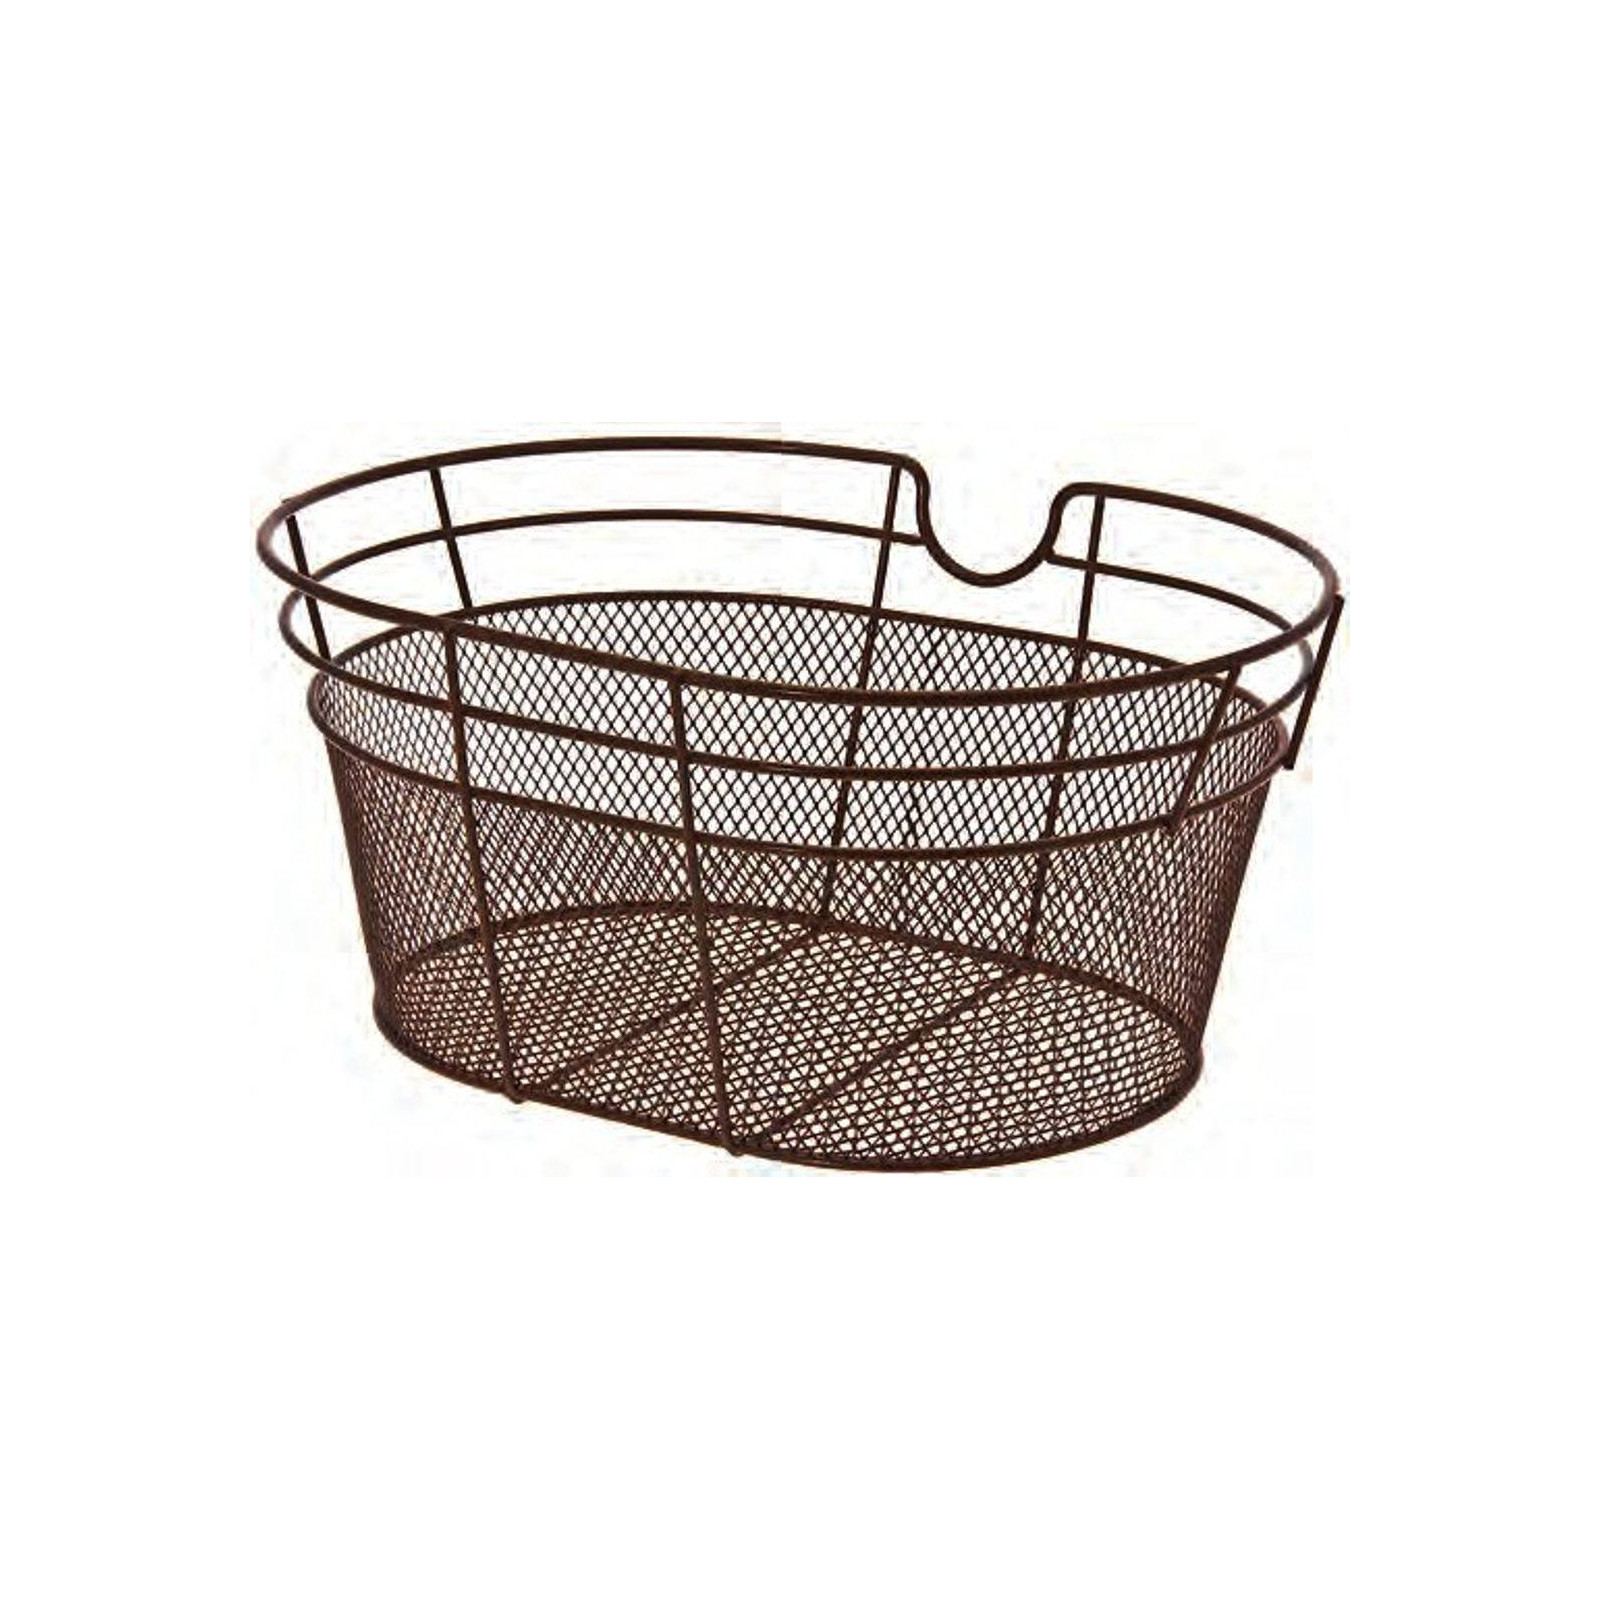 Brown Bicycle Basket Metallic with wire